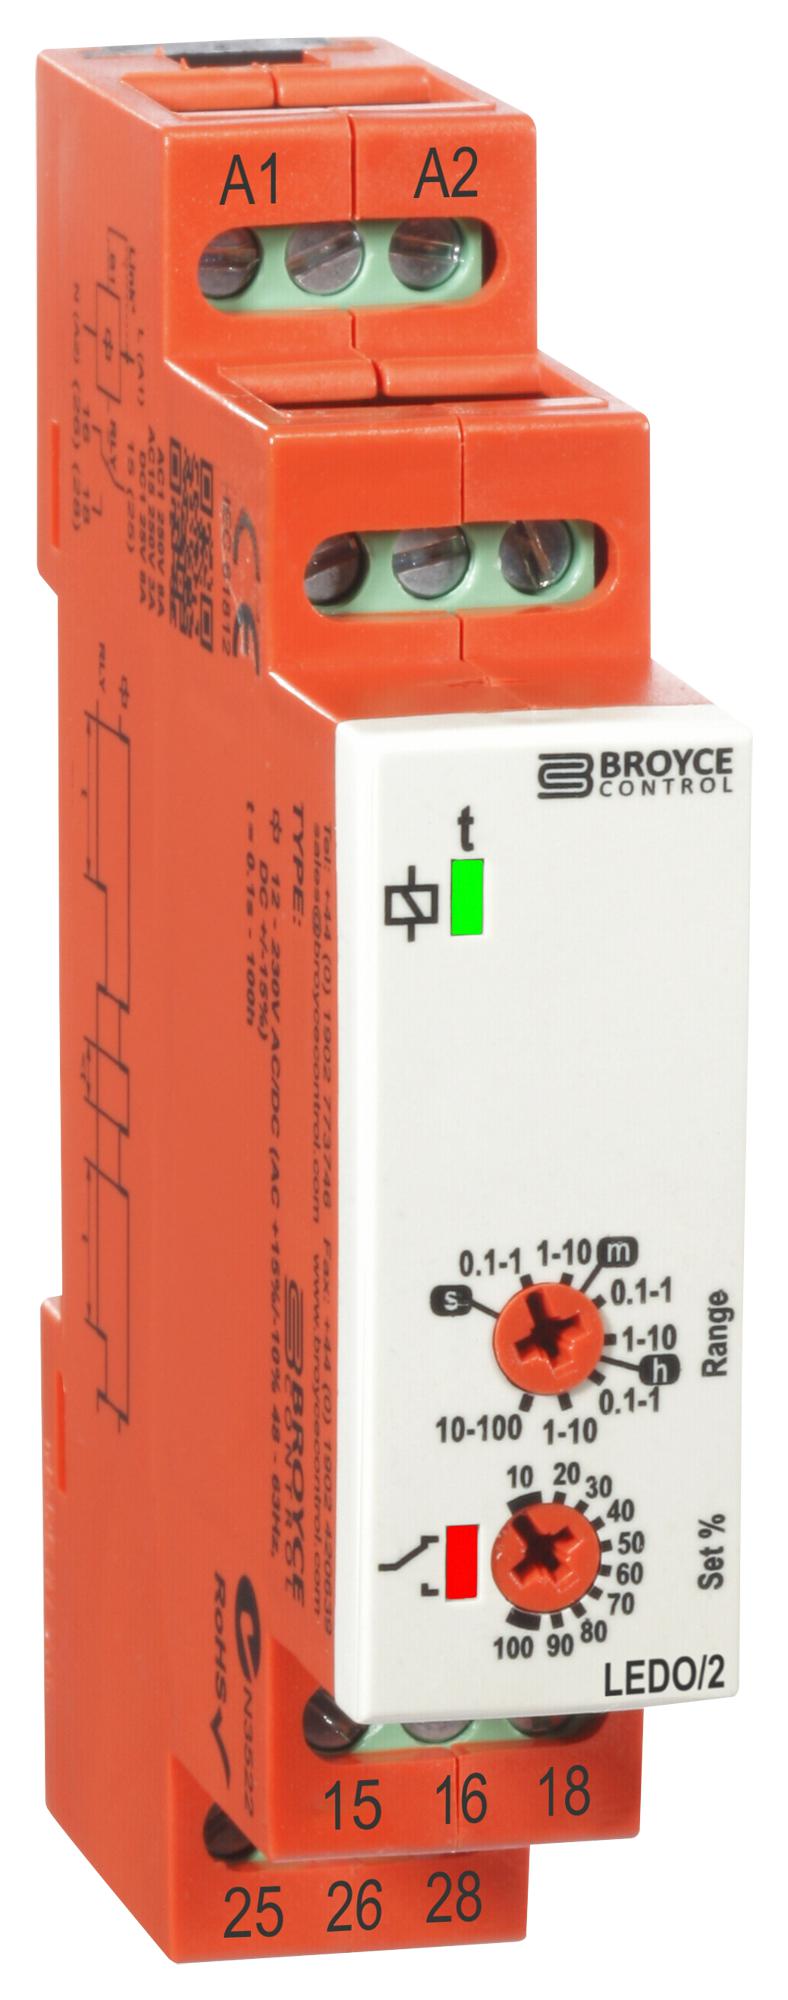 LEDO/2 12-230V AC/DC DELAY-ON-OPERATE TIMER, 0.1S-100H, DPDT BROYCE CONTROL